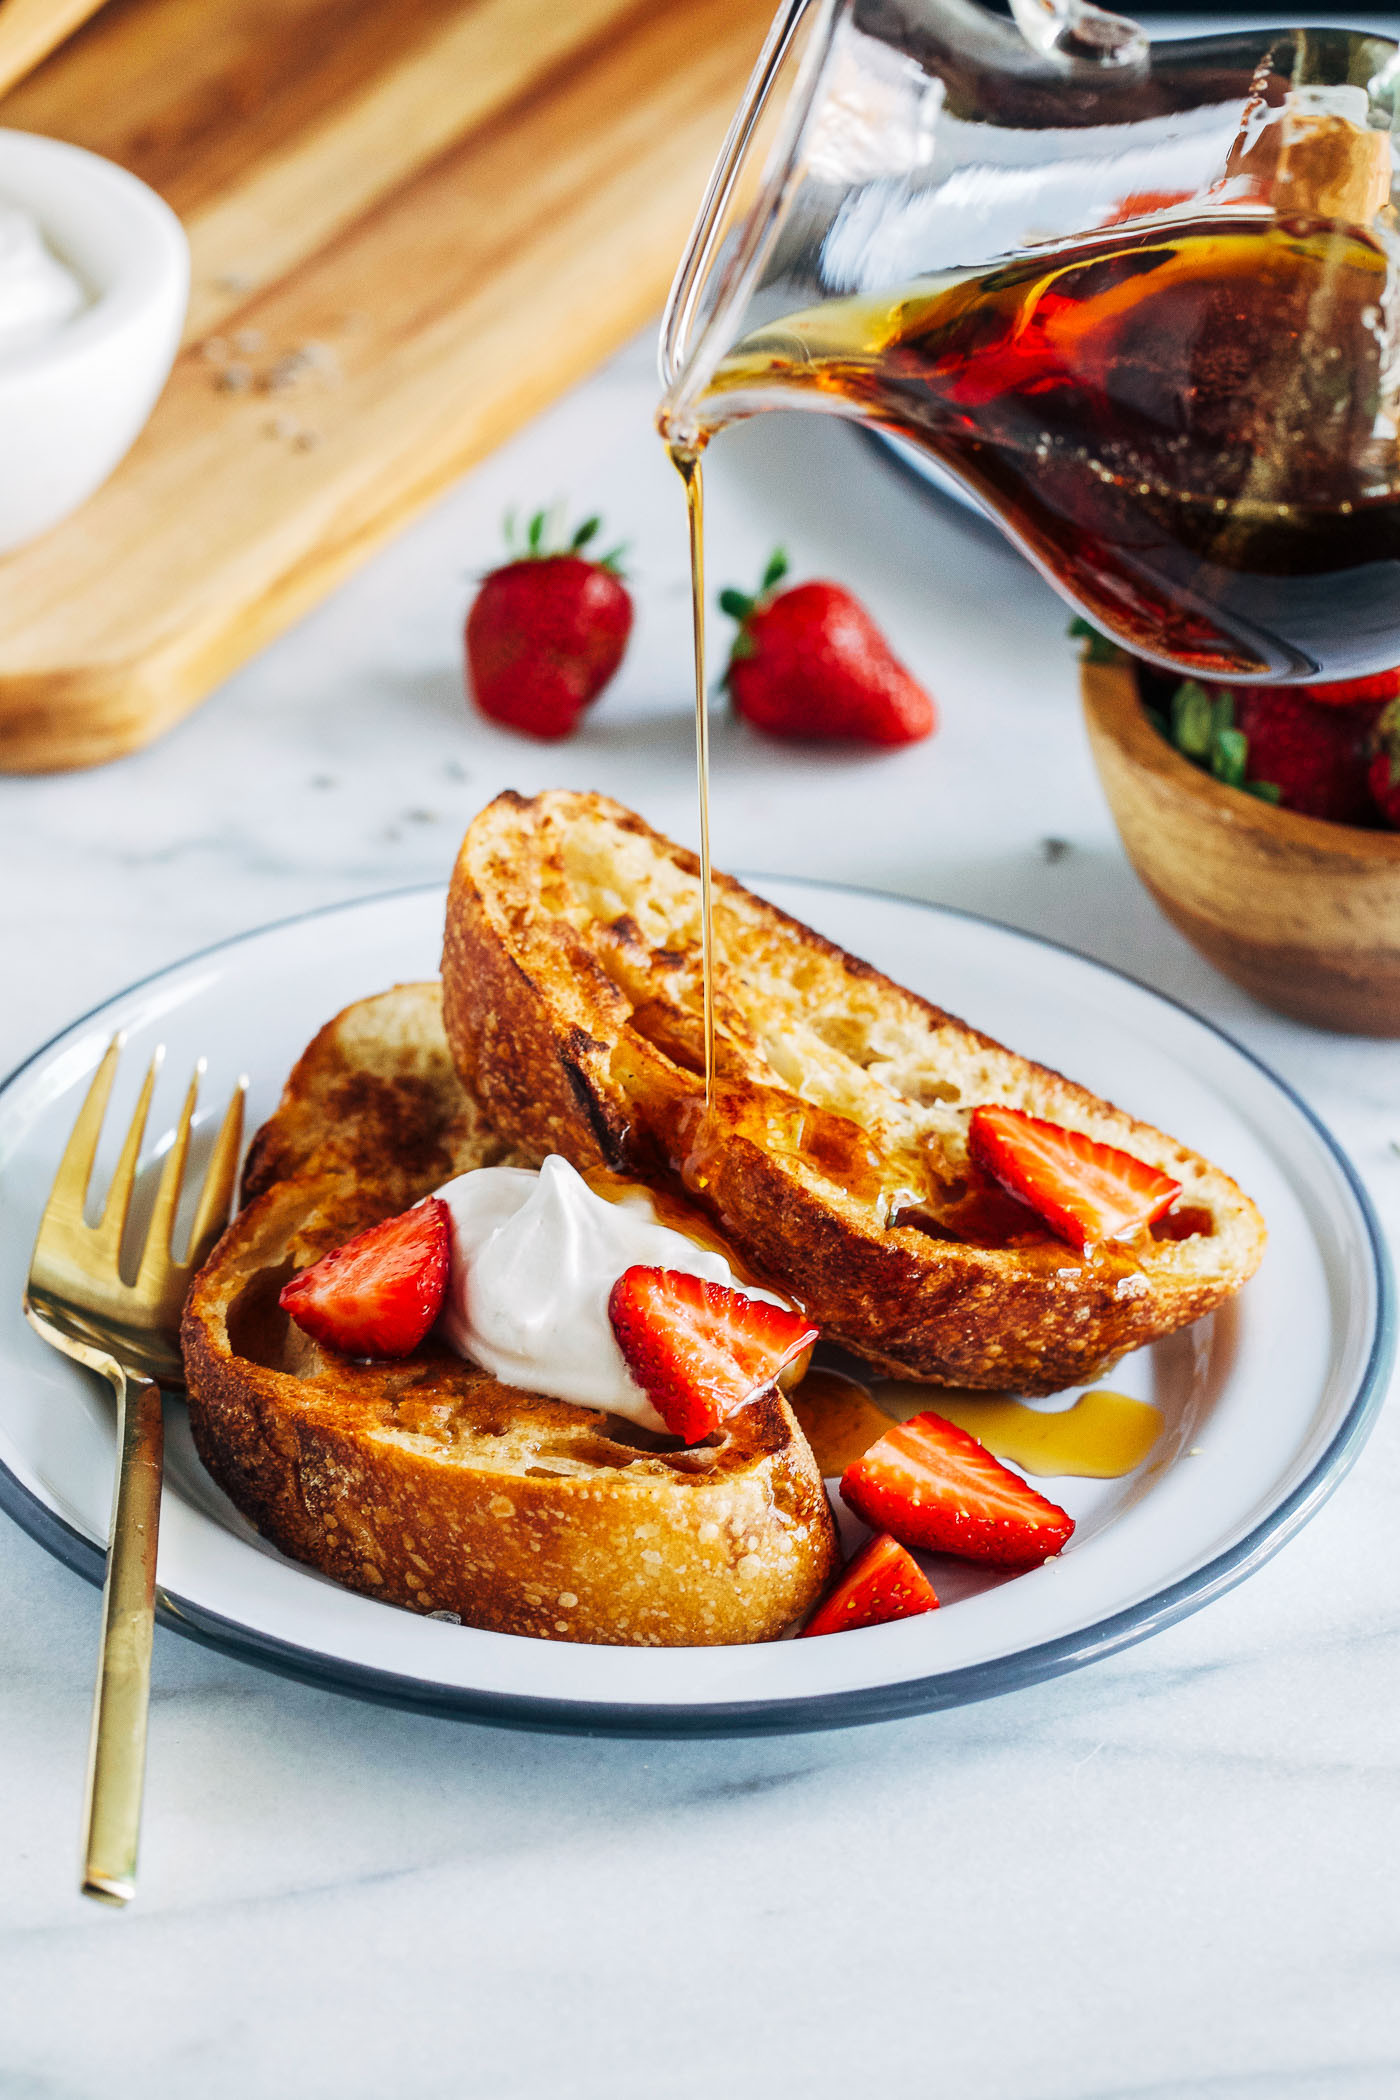 Vegan French Toast Recipe
 Vegan French Toast with Lavender Infused Syrup Making